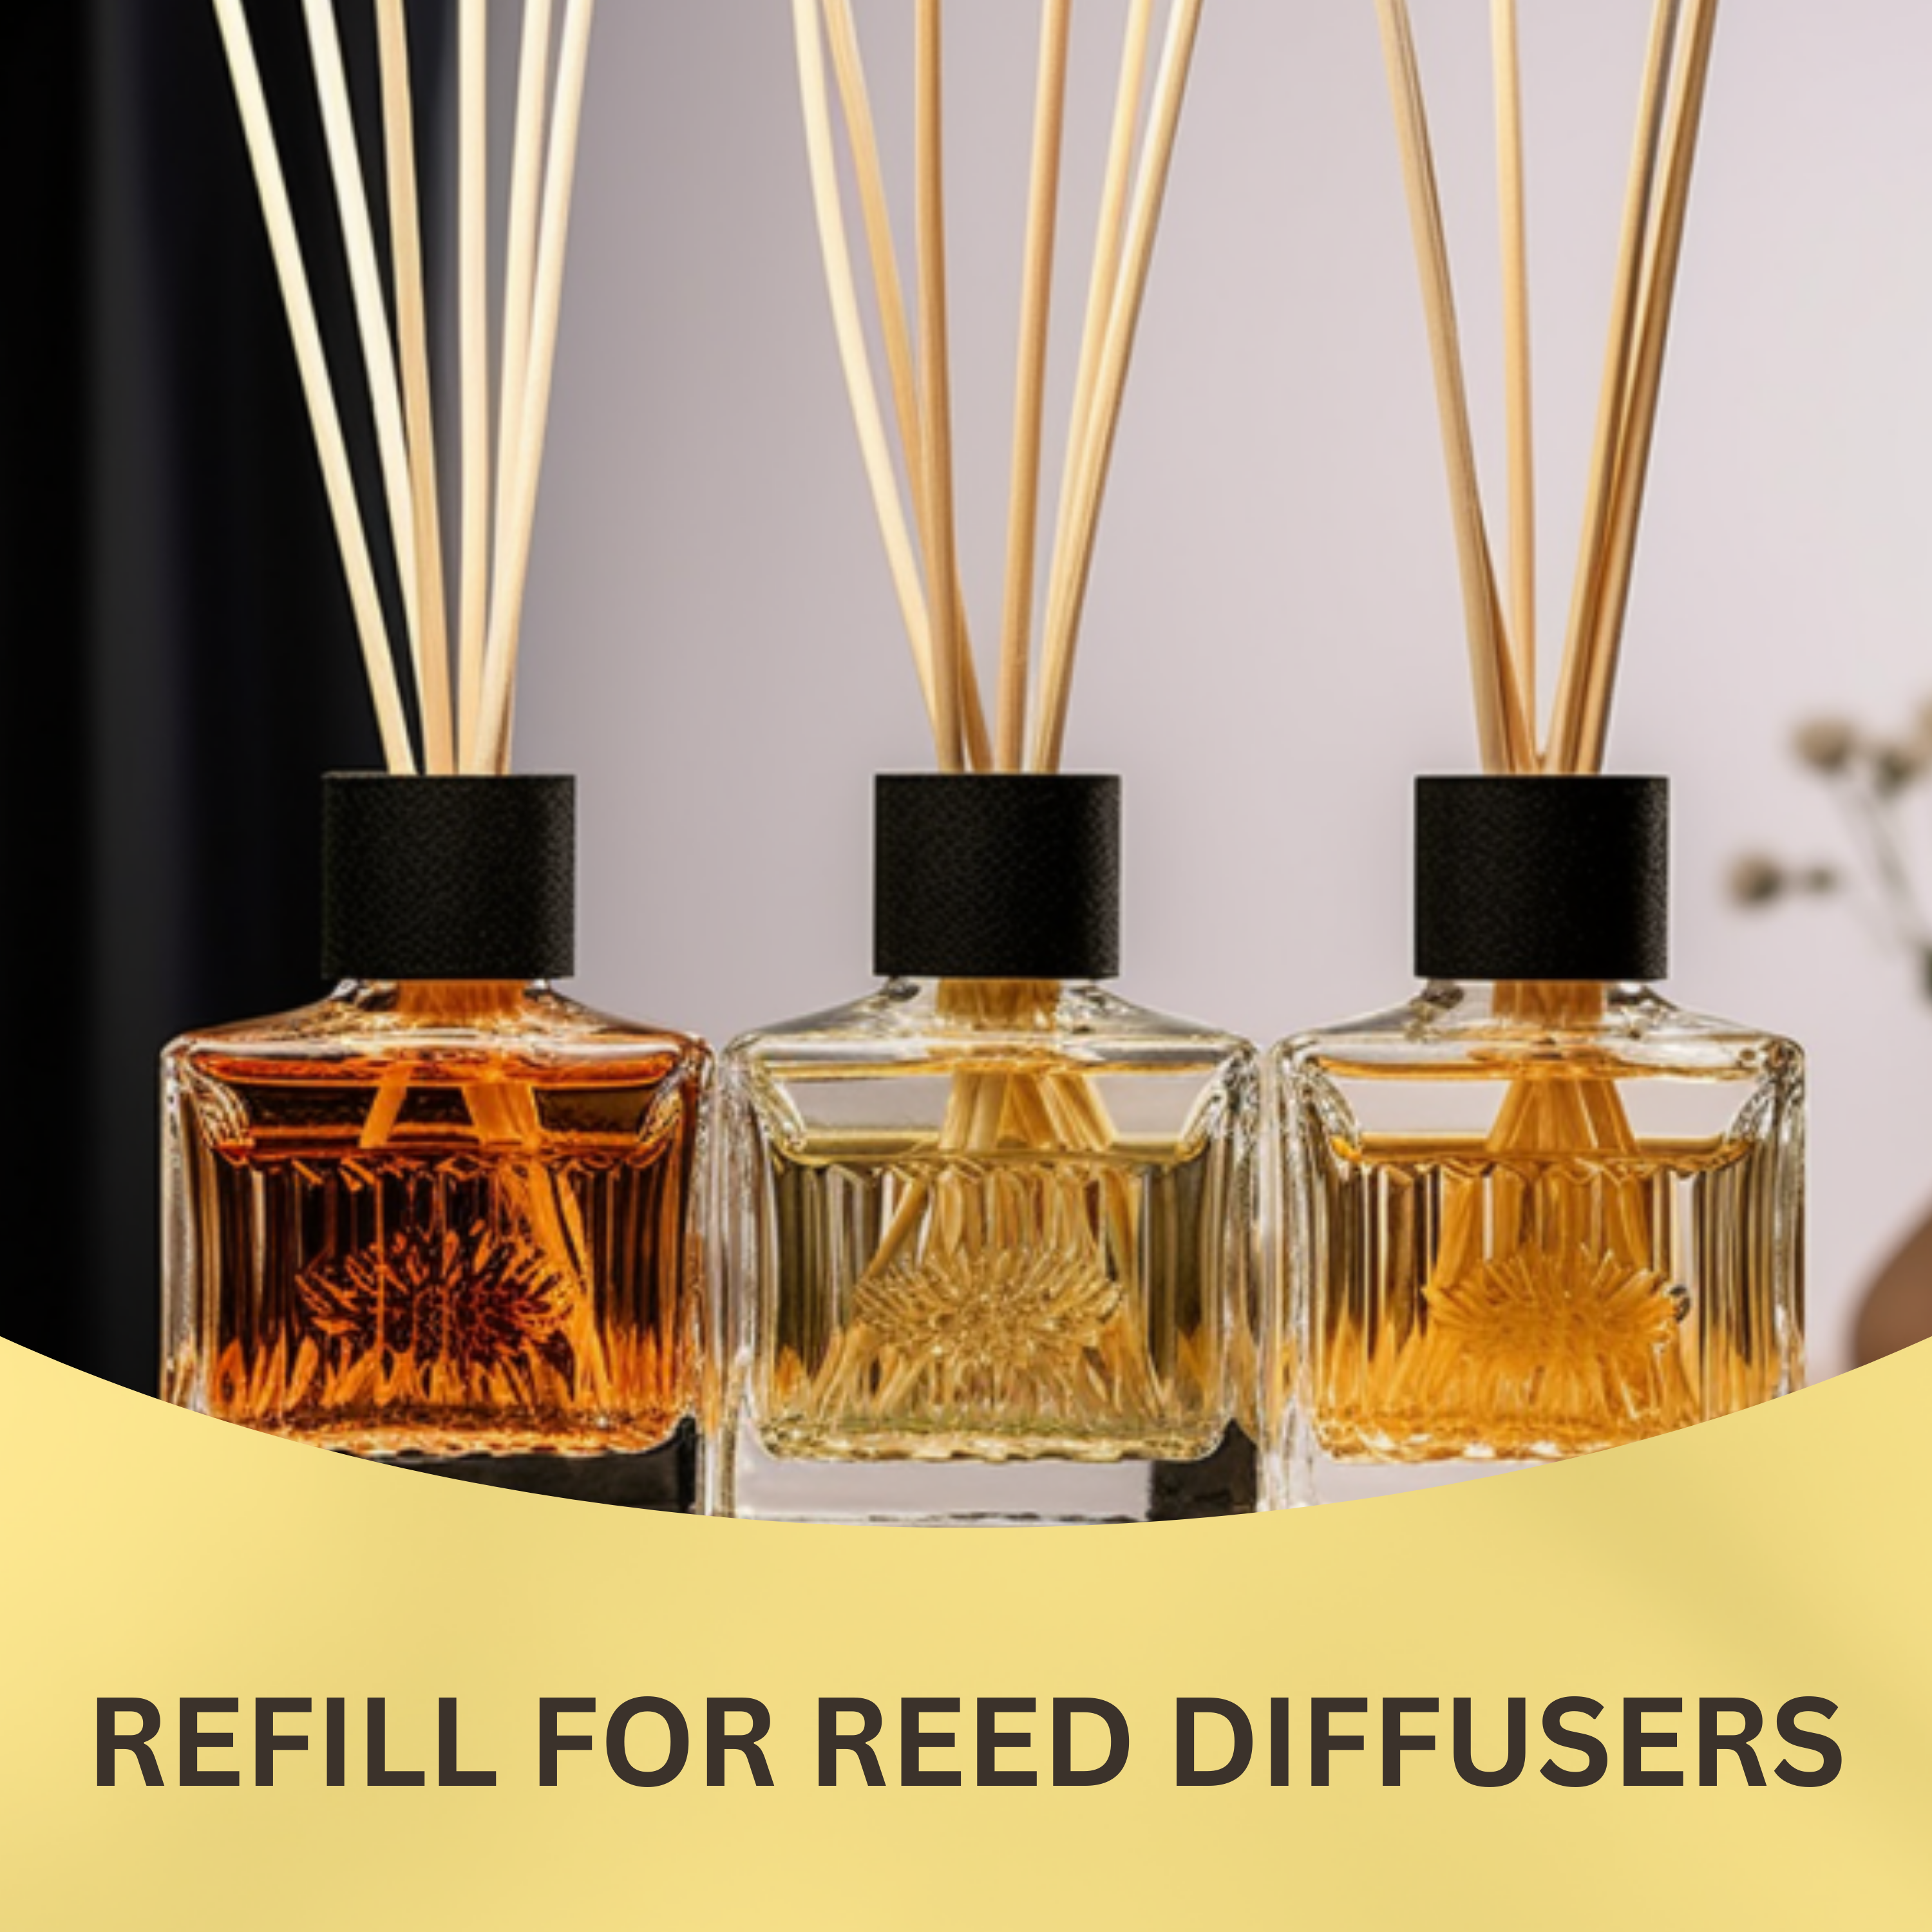 Black Canyon Black Licorice Scented Reed Diffuser Oil Refill